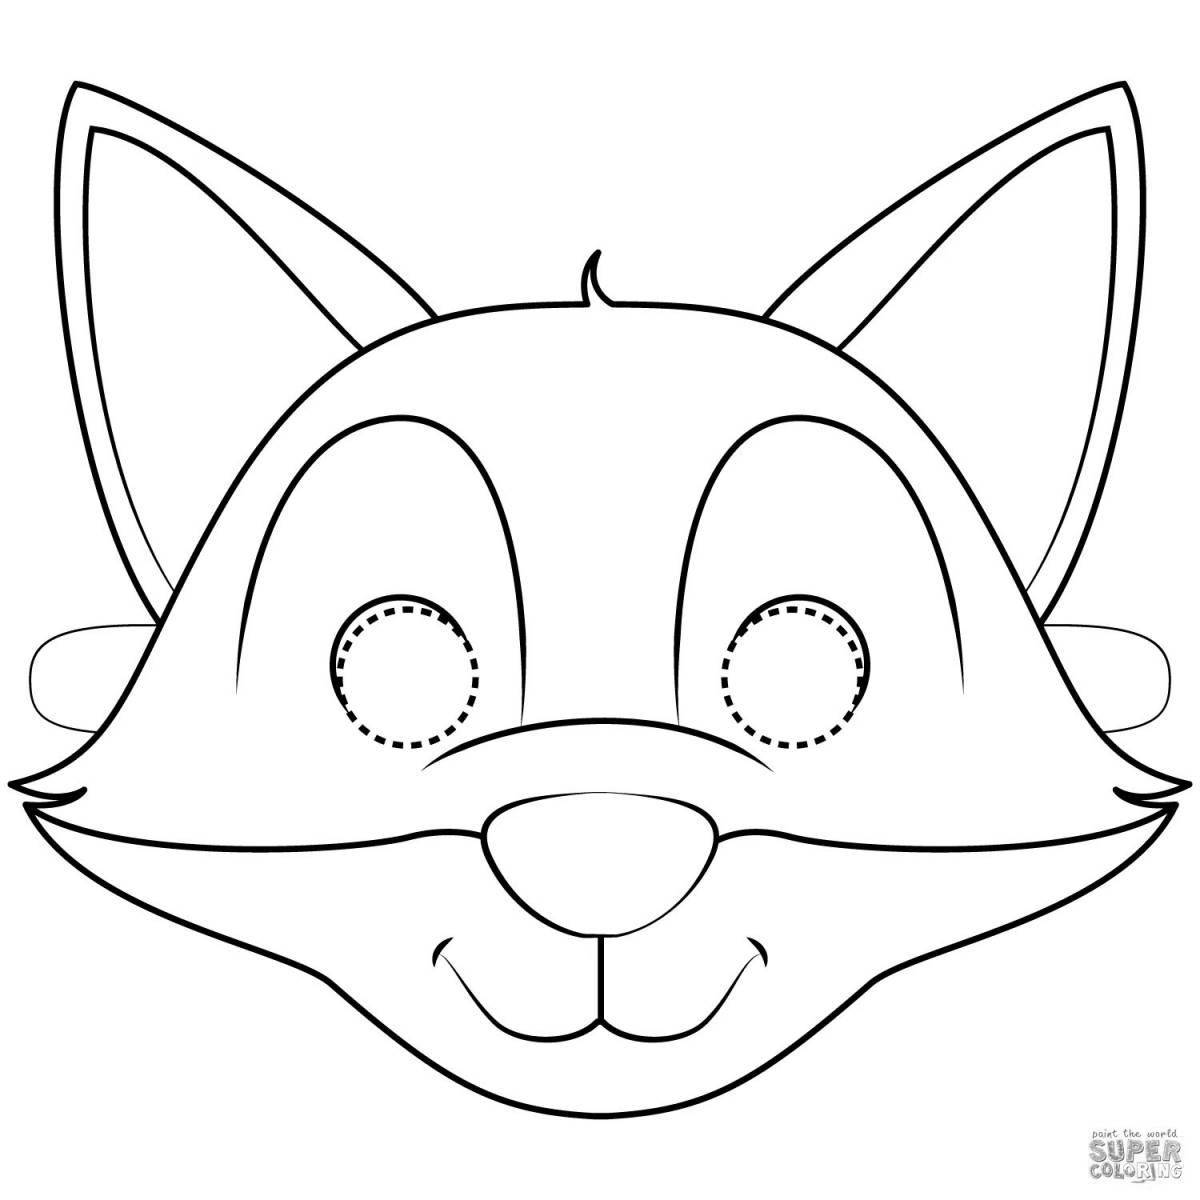 Colorful animal mask coloring book design